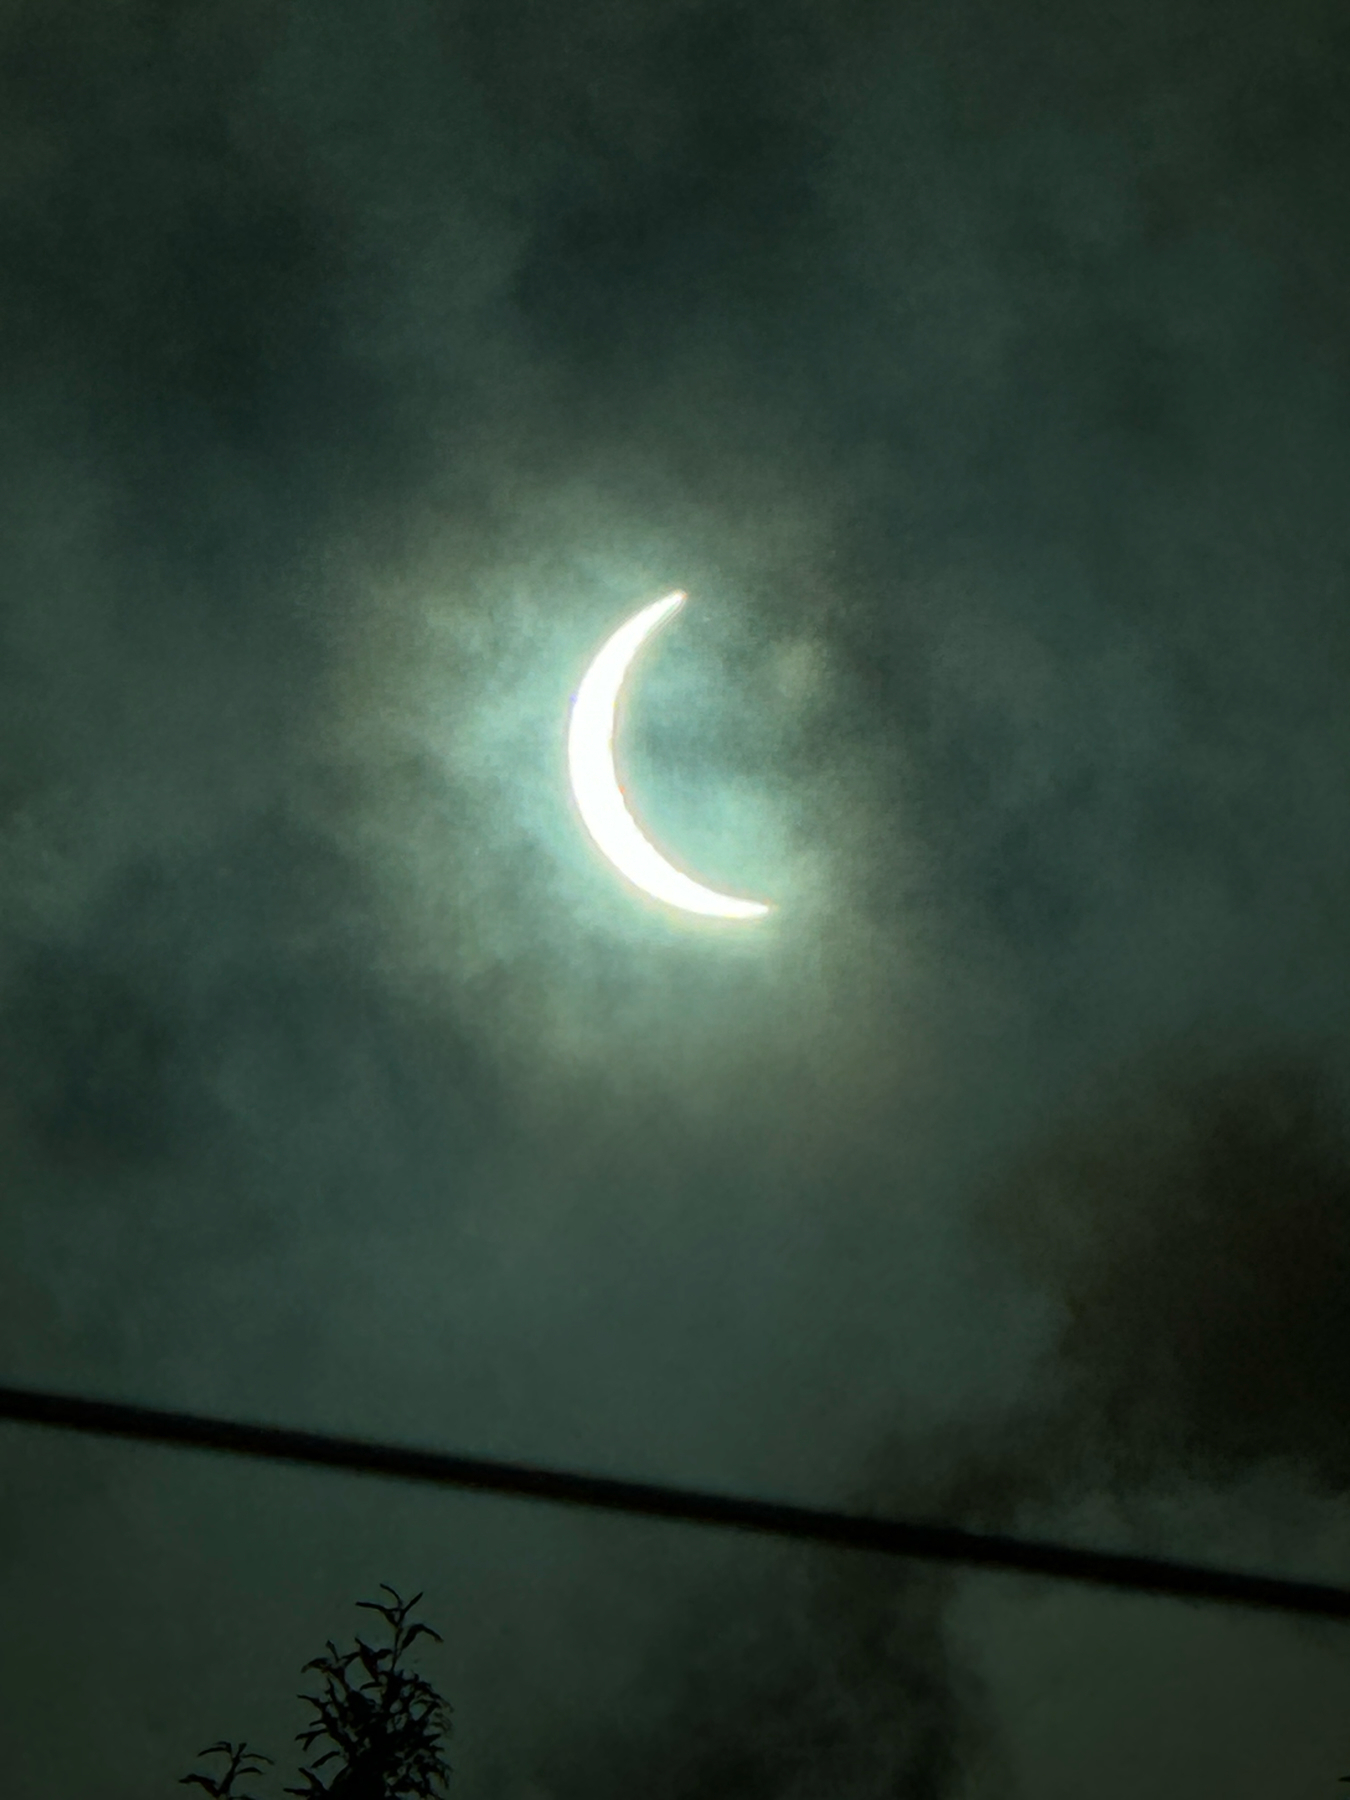 Zoom shot of eclipse at about 89% coverage